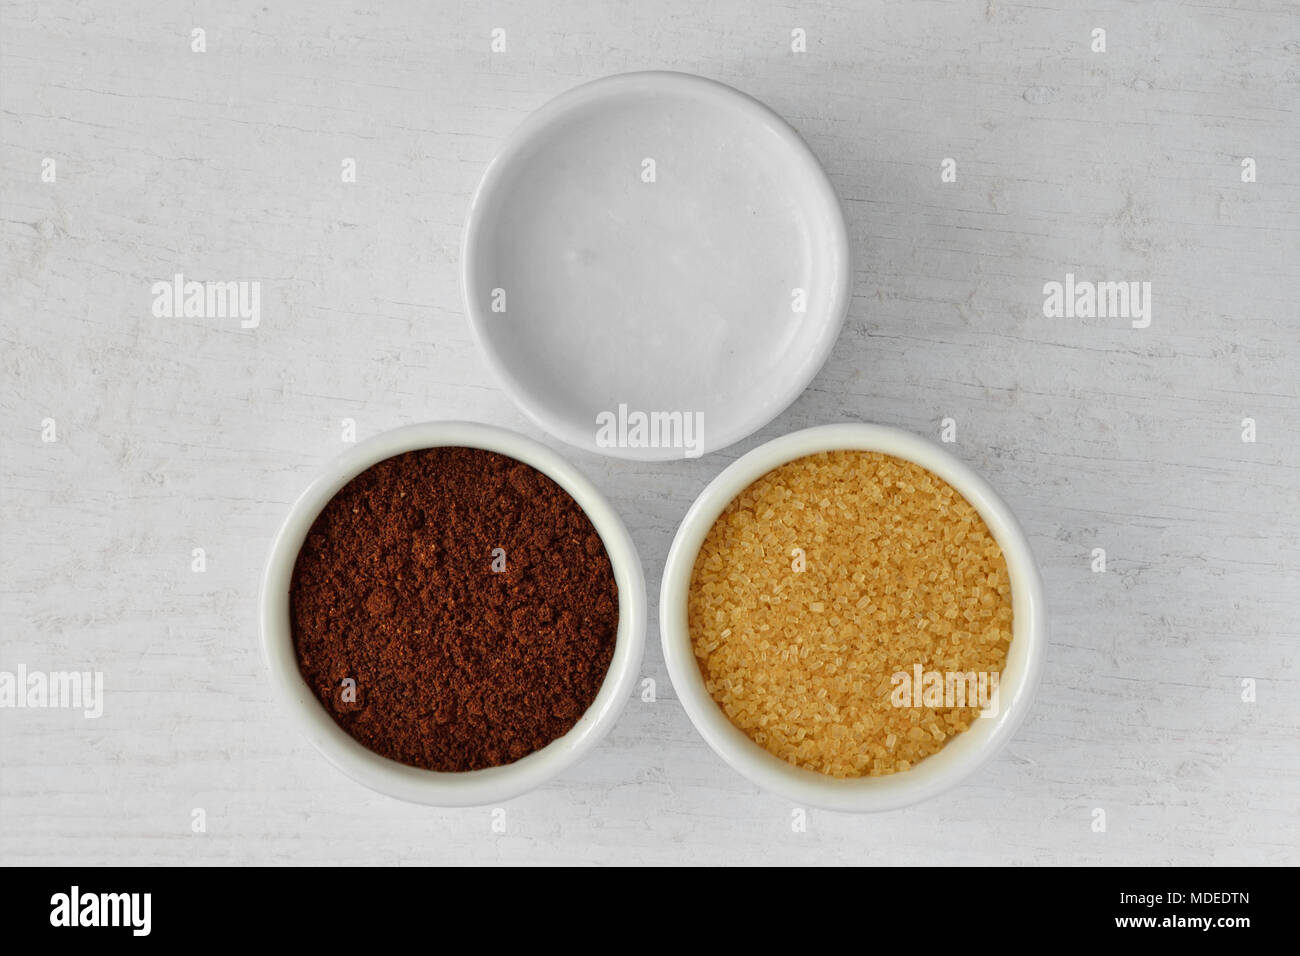 Homemade face scrub made out of coconut oil, coffee powder and brown sugar on wooden background Stock Photo